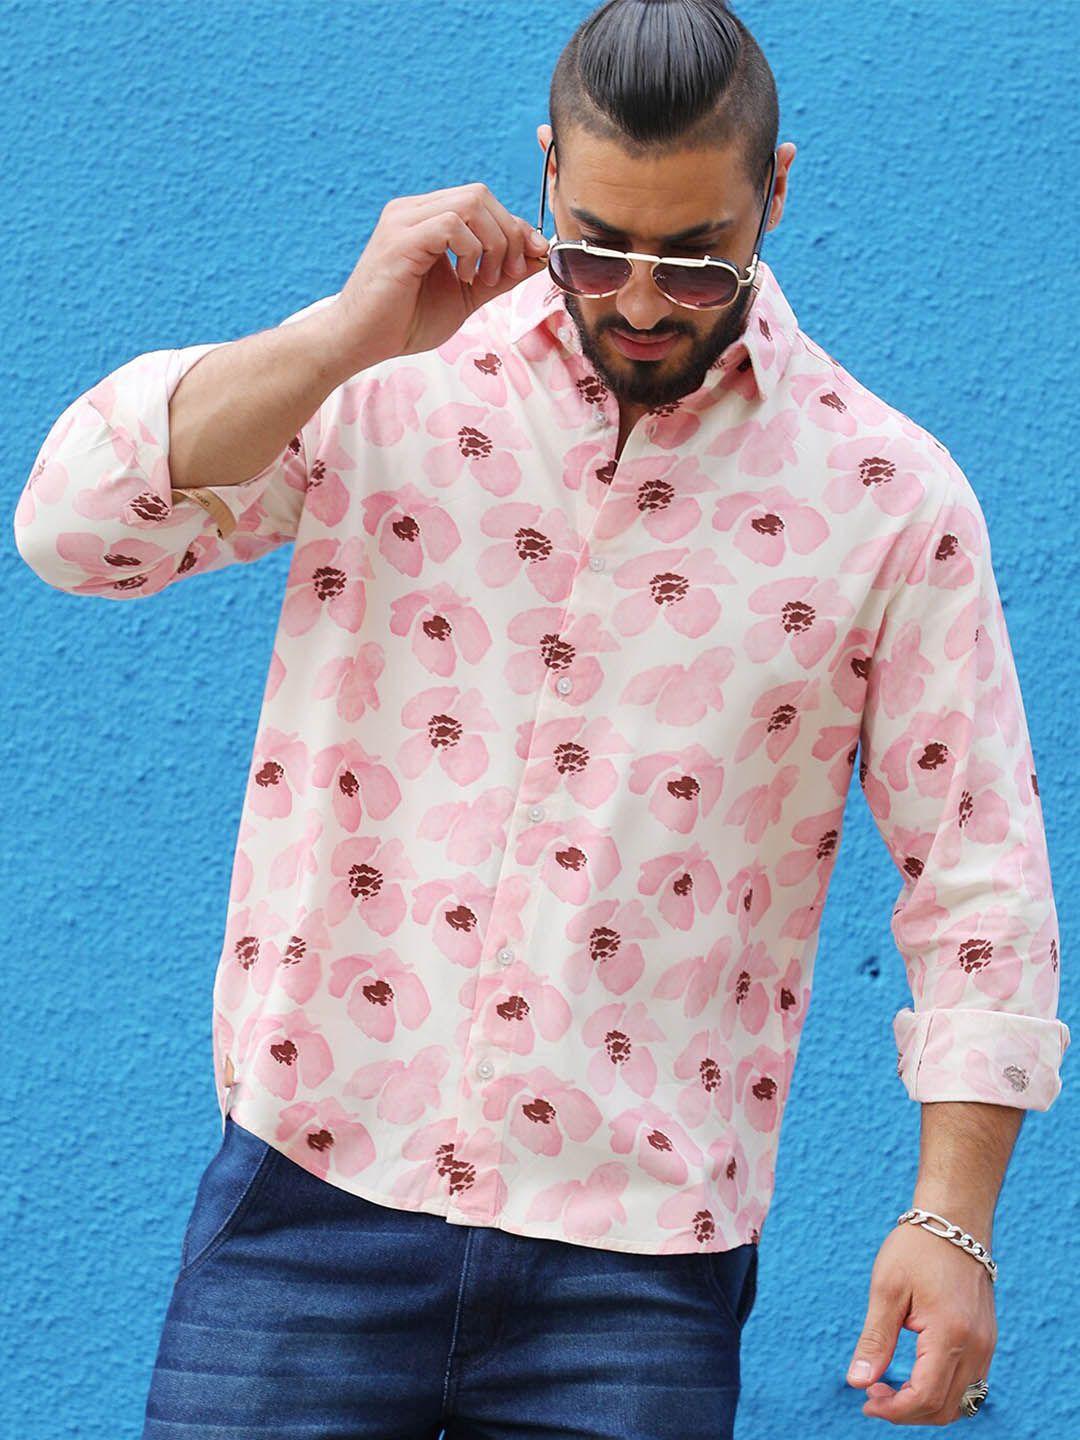 instafab-plus-classic-floral-printed-spread-collar-casual-shirt